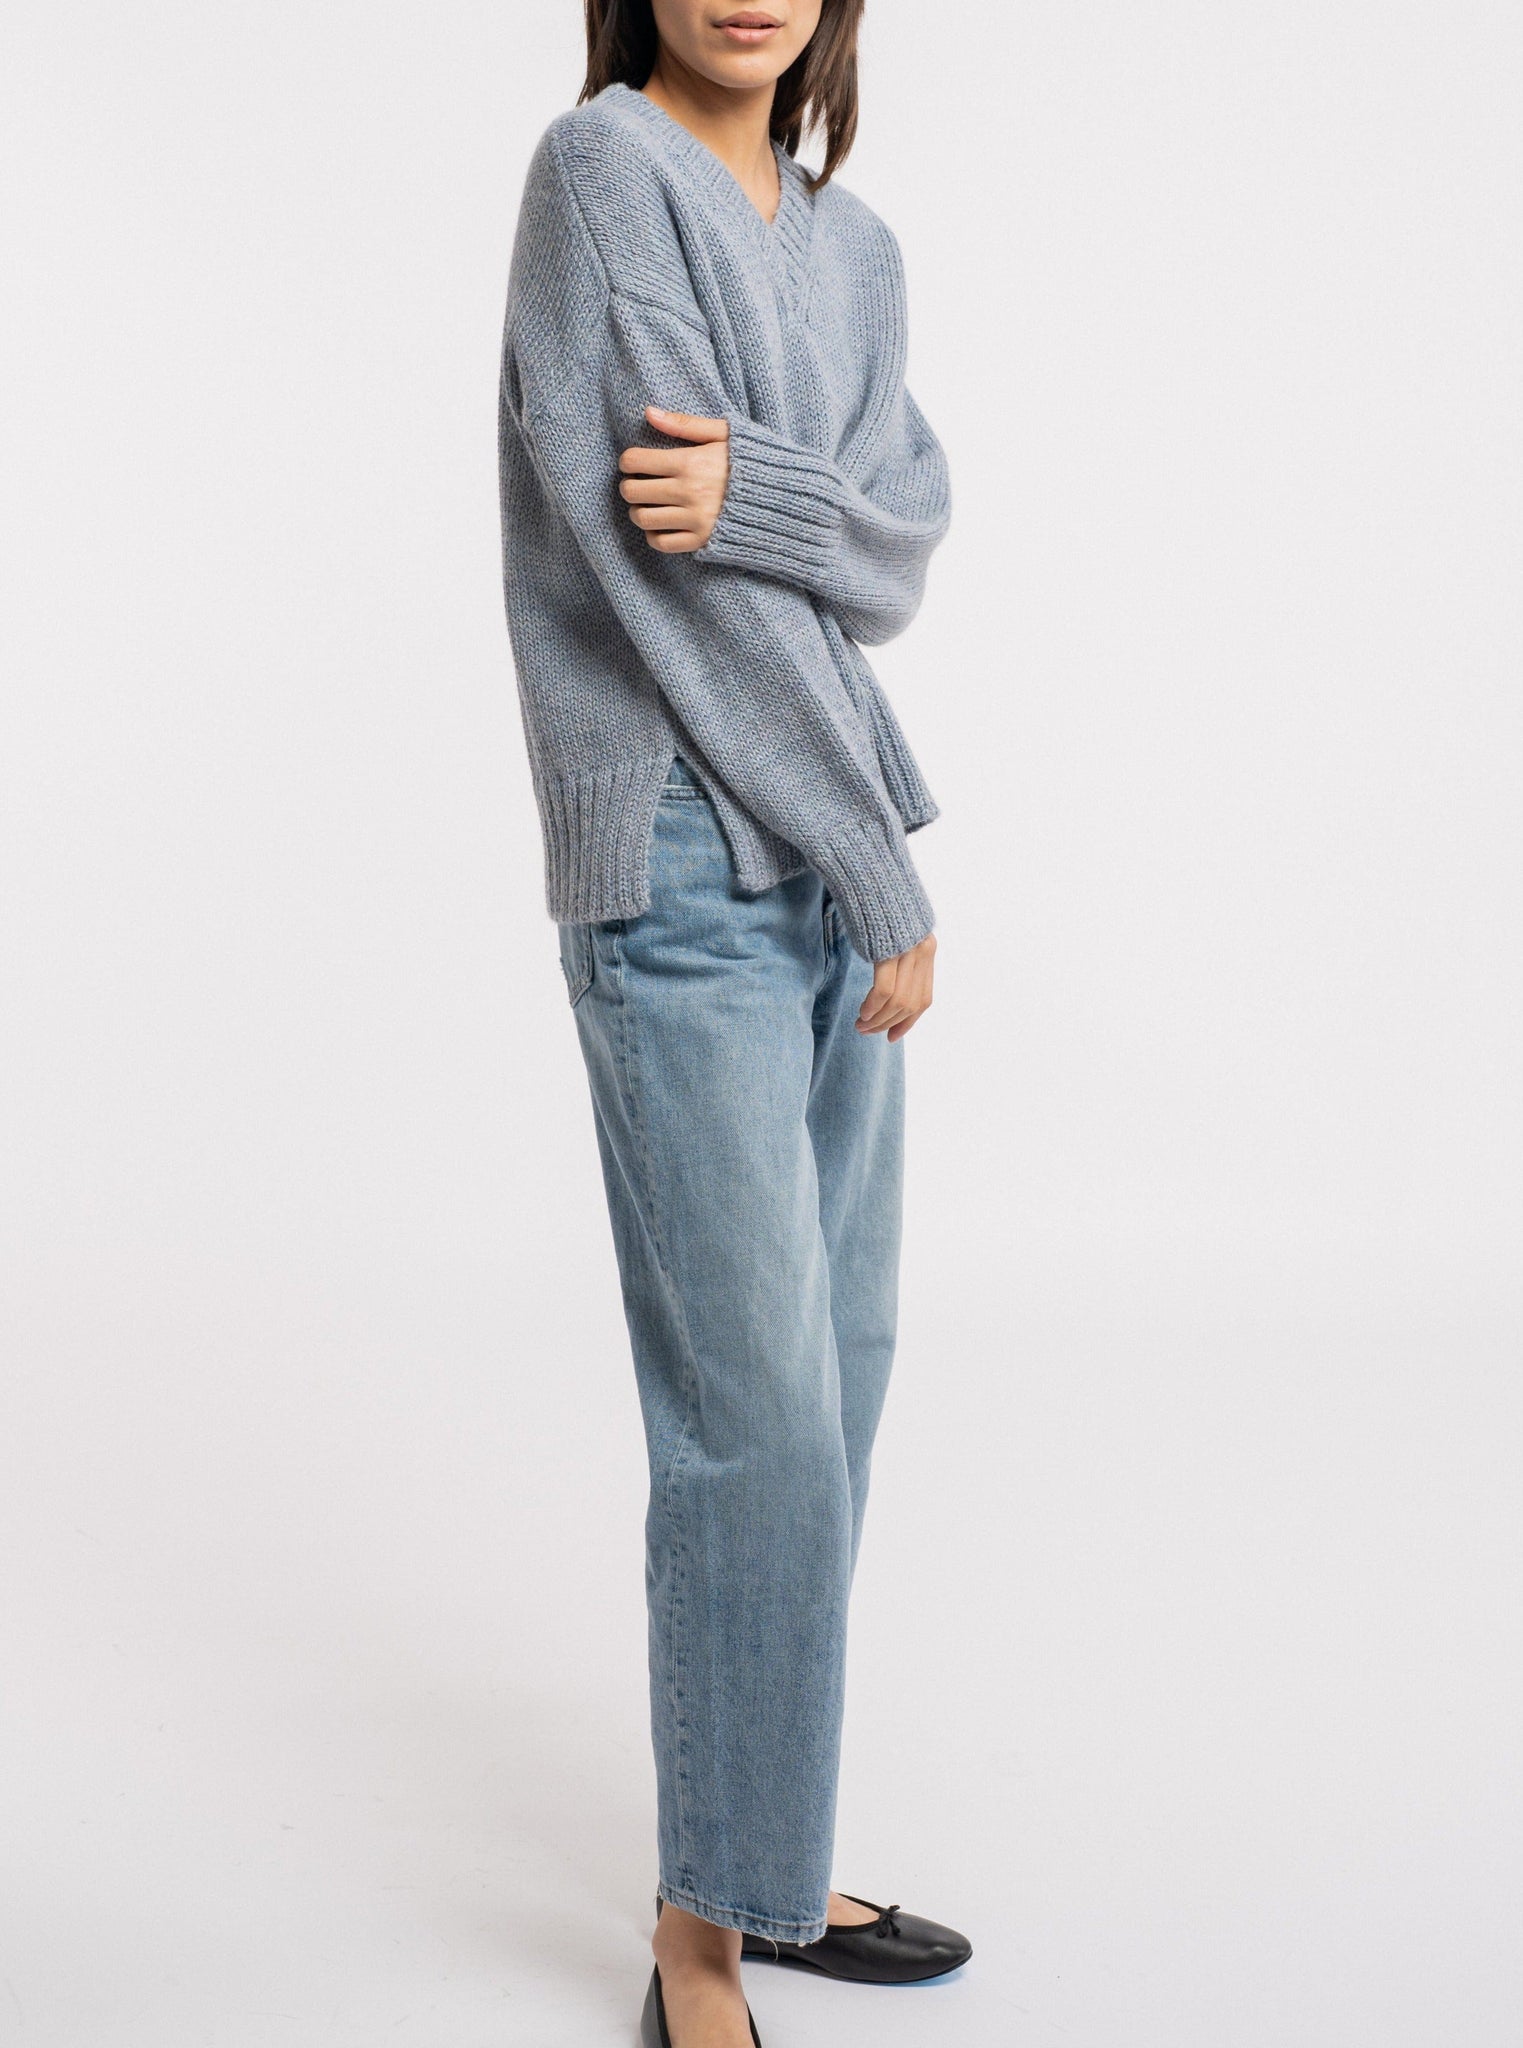 The model is wearing a Billy Sweater - Dusty Blue and jeans.